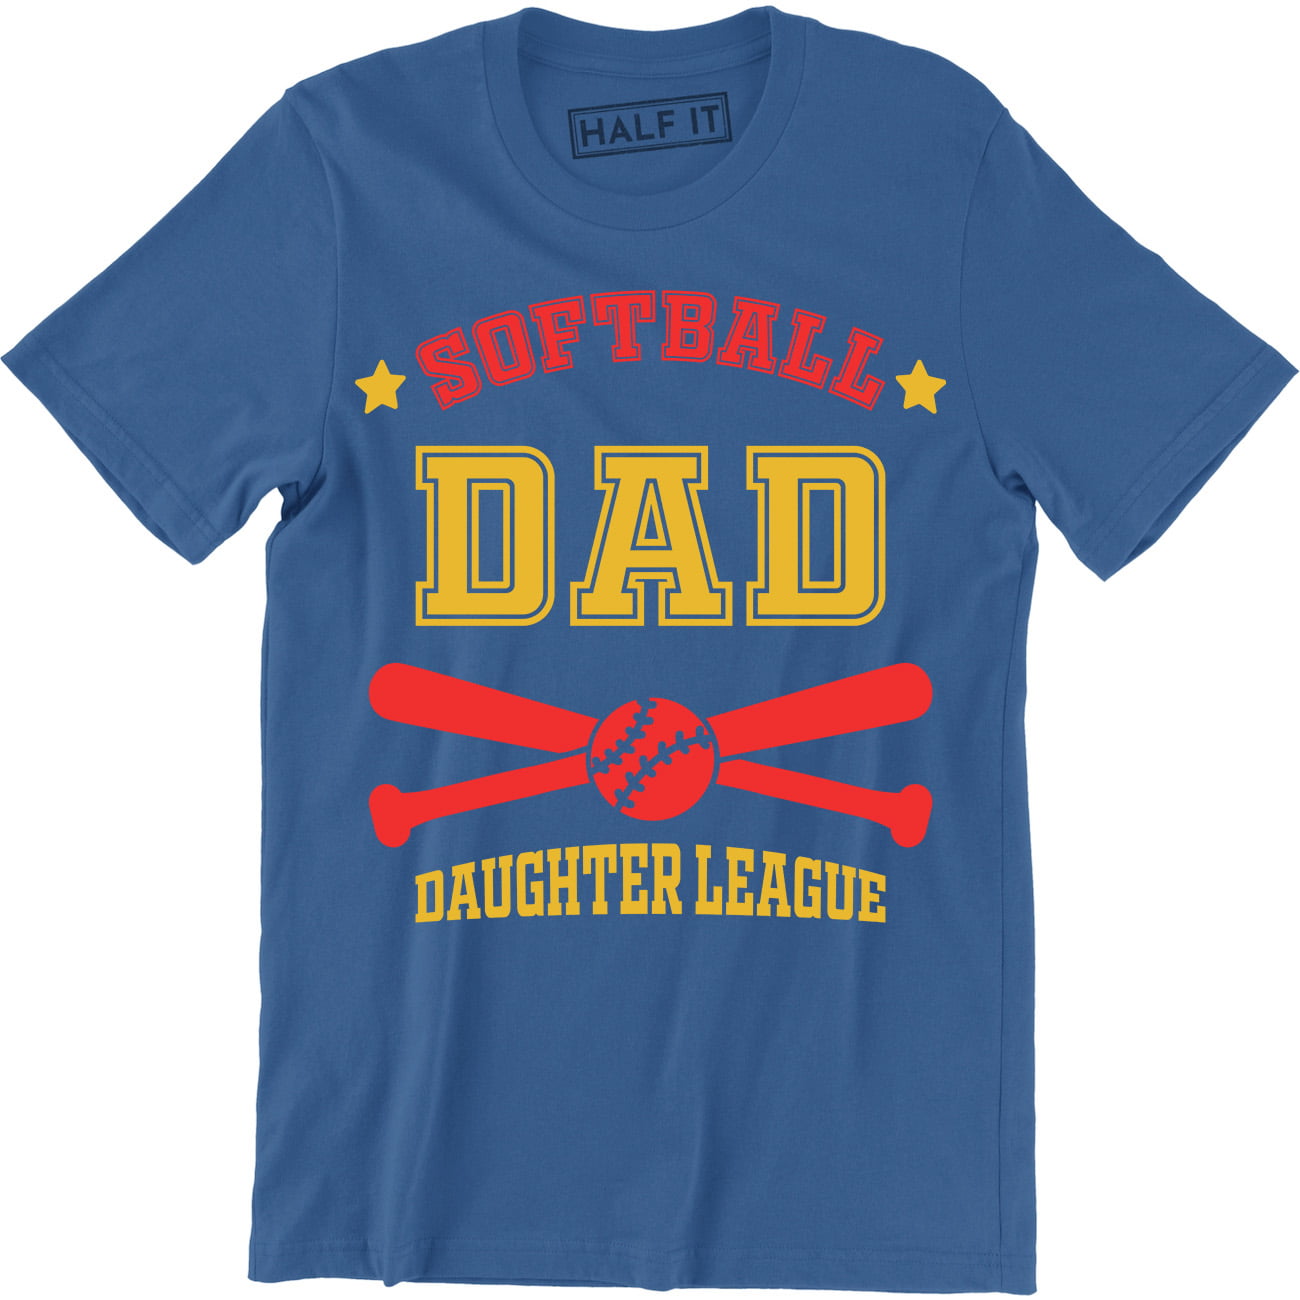 Softball Dad Daughter League - Funny Baseball Gift From Son Men's T-Shirt